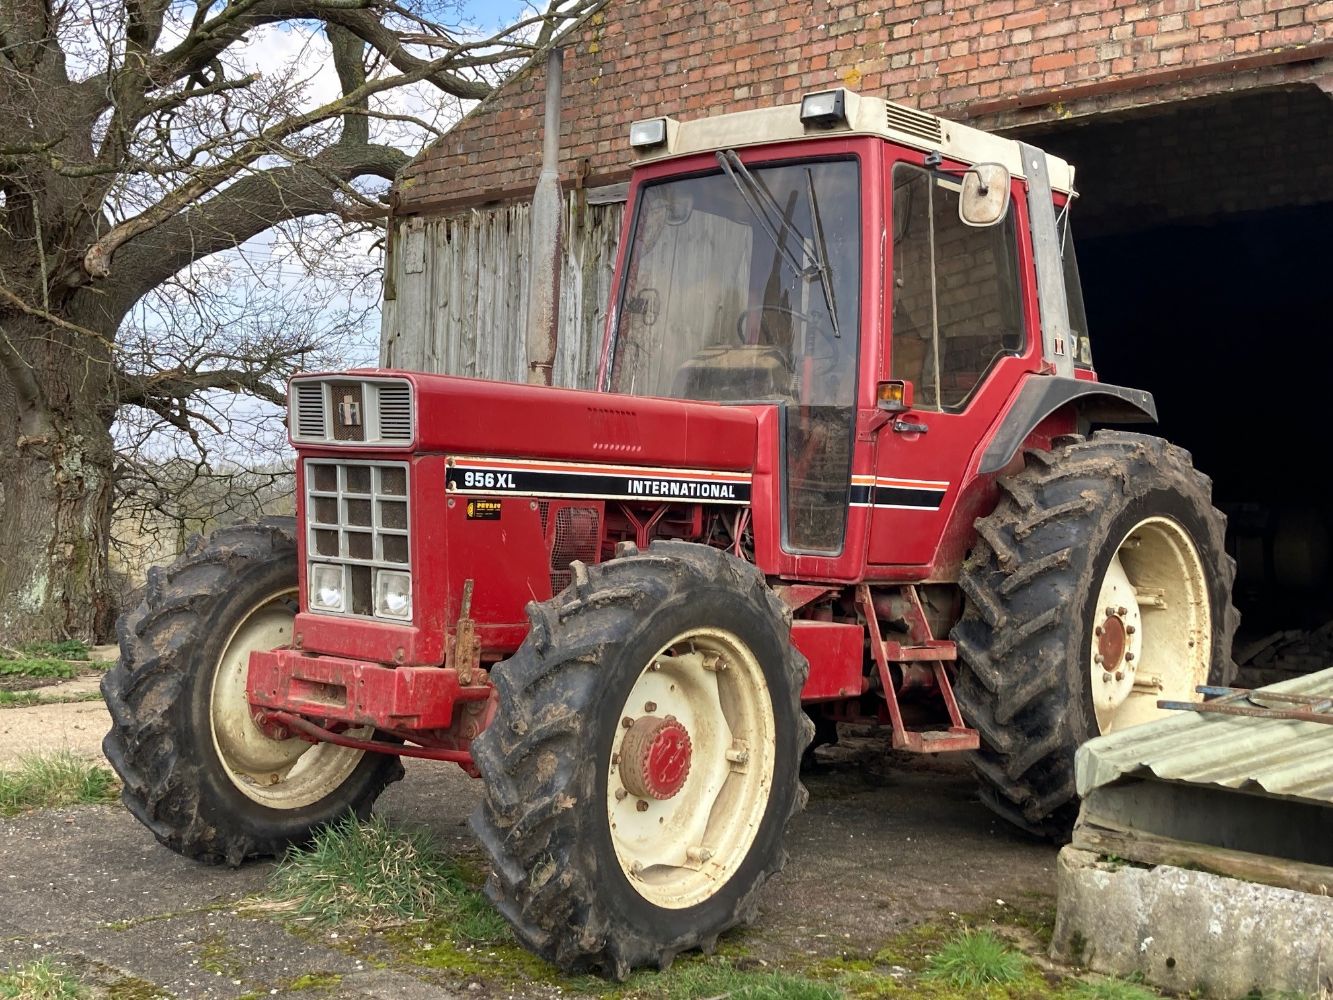 Timed Online Dispersal Auction of Vintage & Classic Tractors, Crawlers, Vehicles, Implements & Bygones